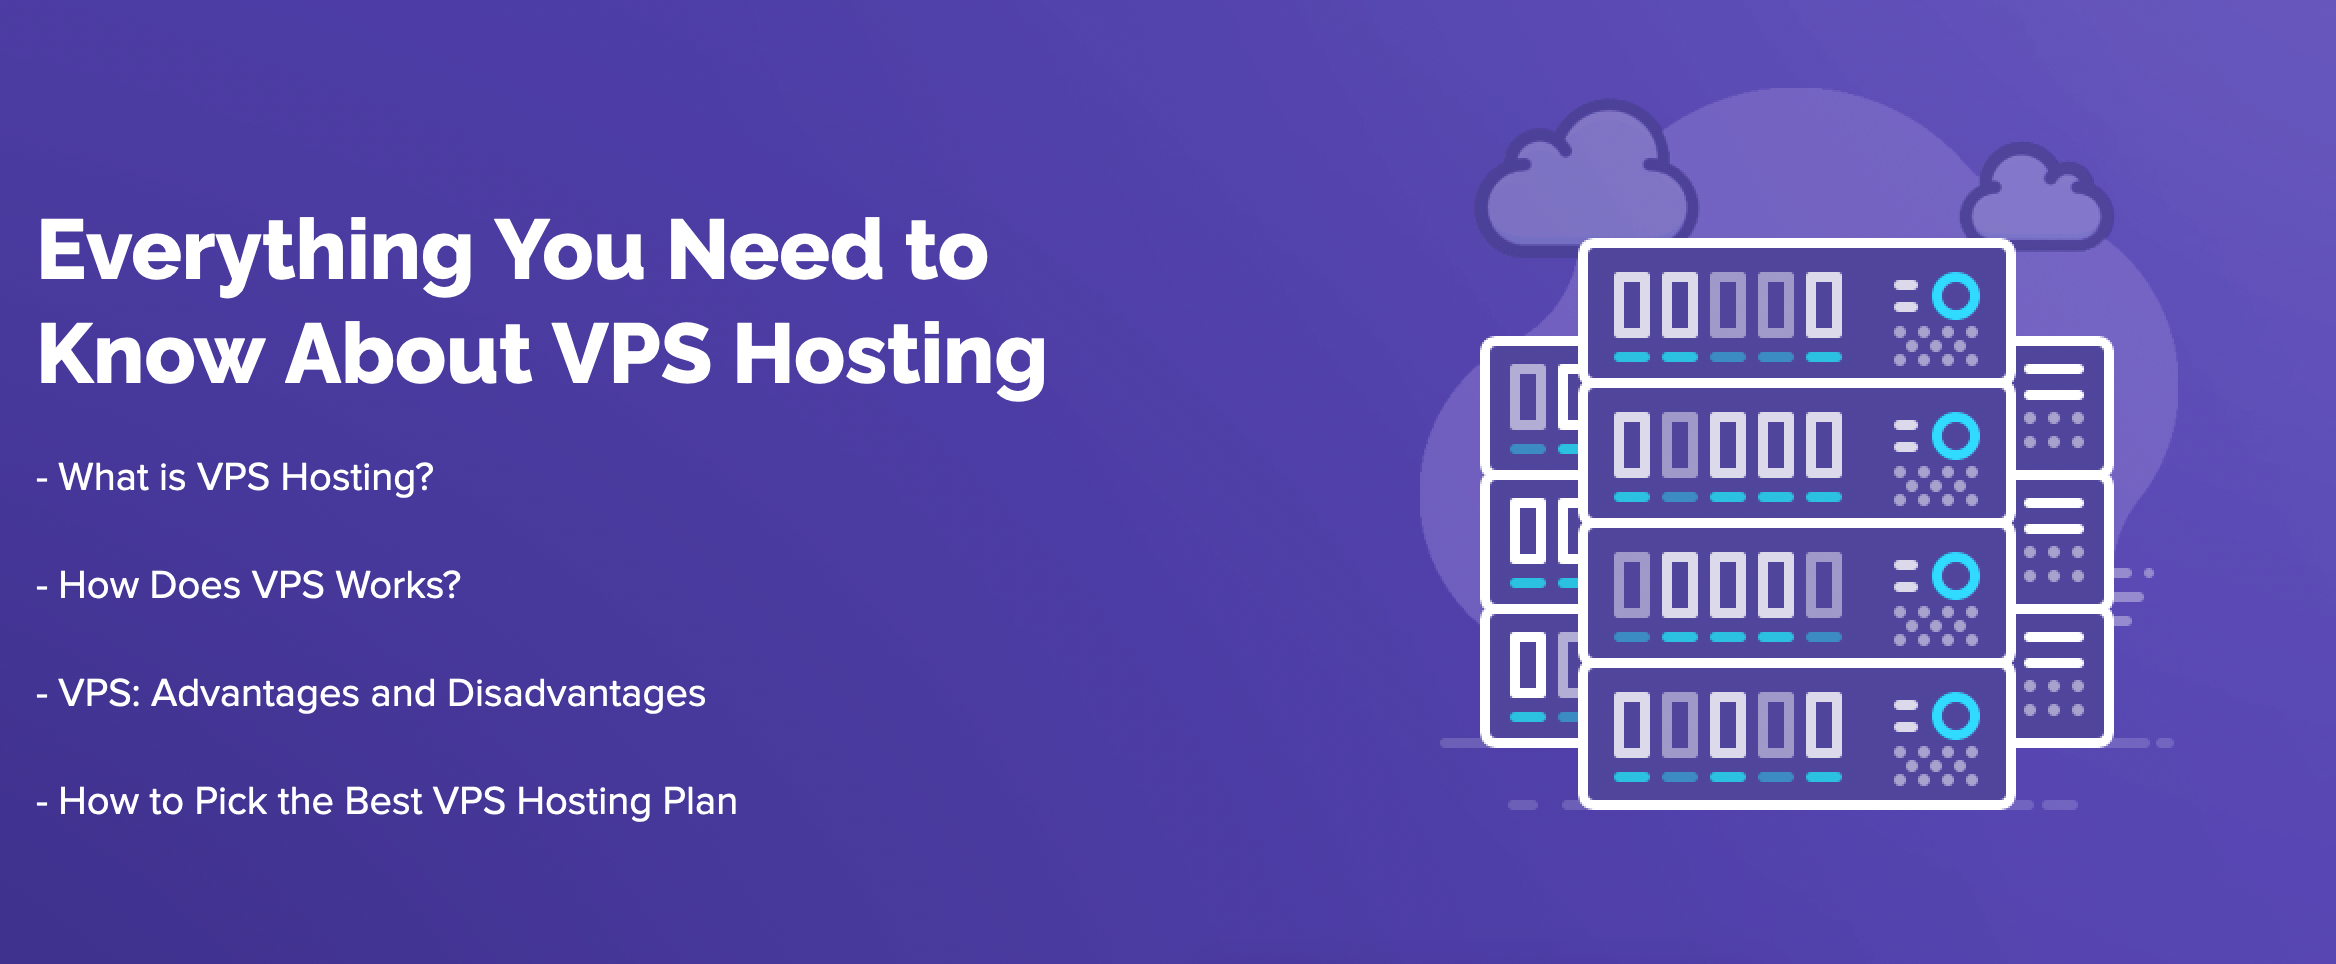 everything you need to know about vps hosting - hostnamaste